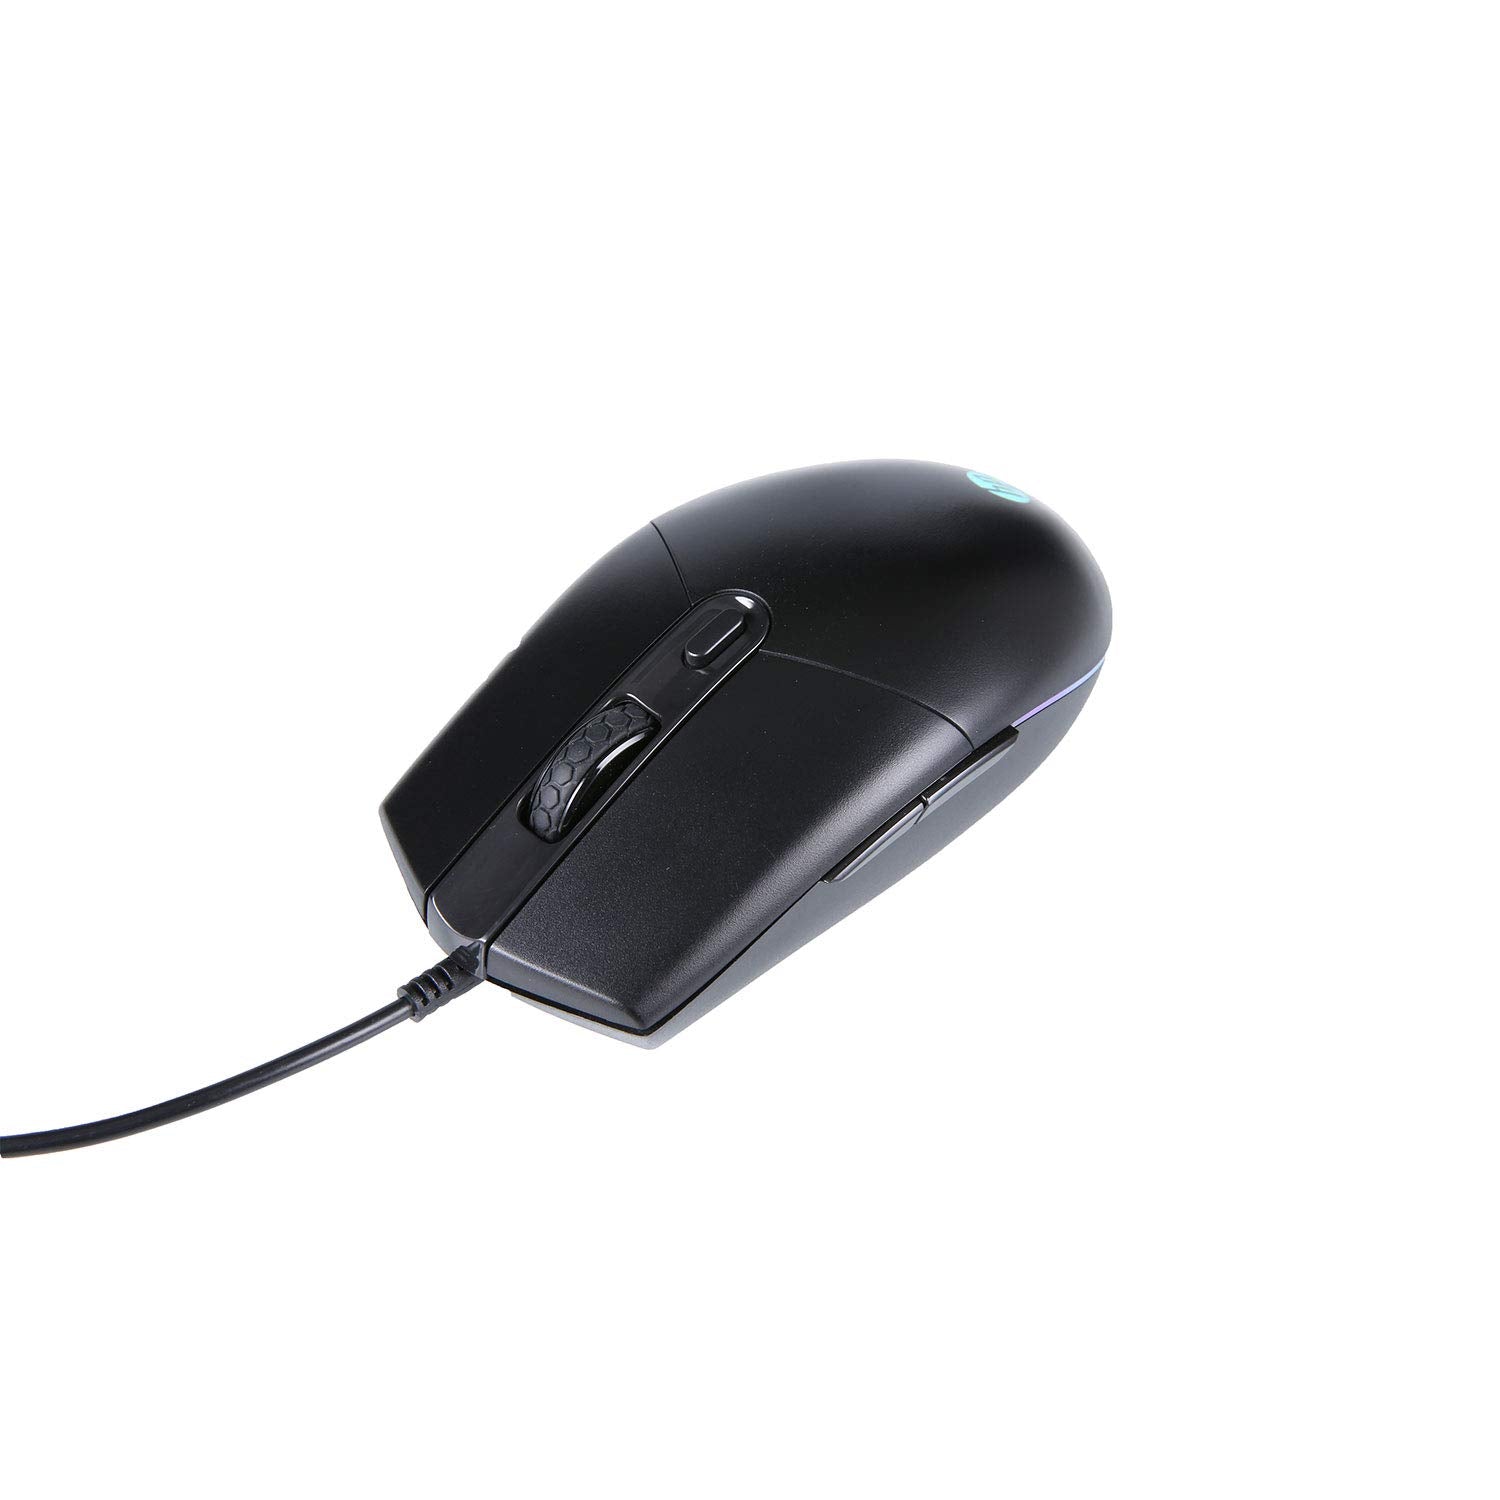 HP M260 Gaming Mouse with RGB backlighting, 6 Programmable Buttons, Customizable 6400 DPI, Ergonomic Design, Non-Slip Roller, Lightweight USB Wired Mouse...